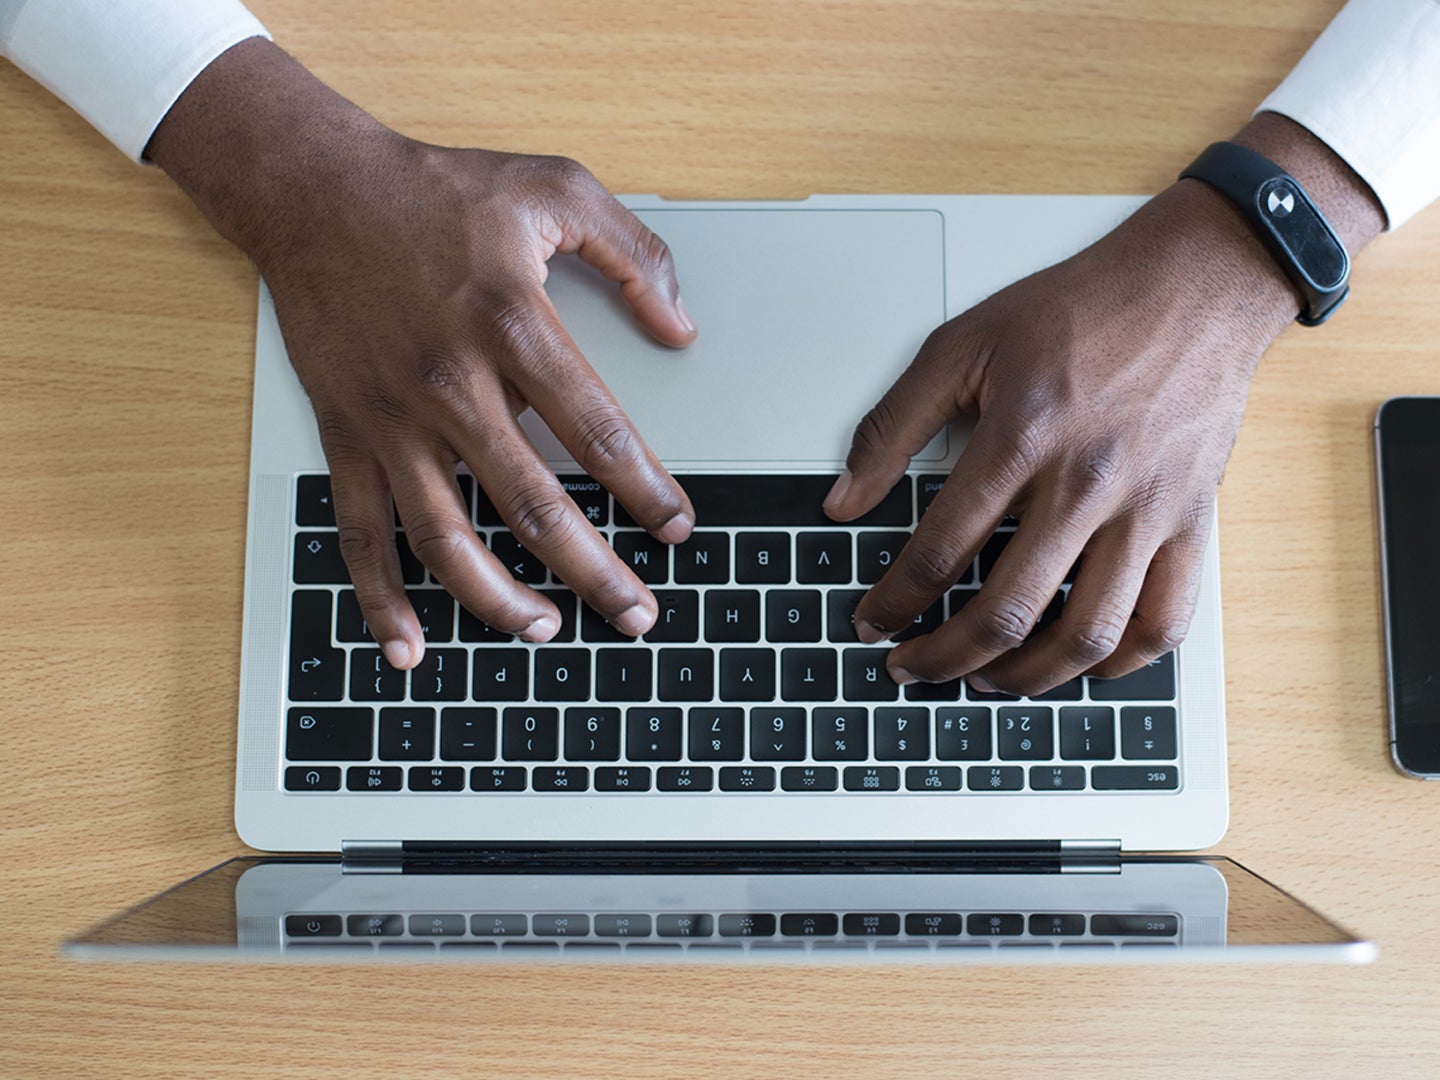 A person's hands on a Macbook keyboard.